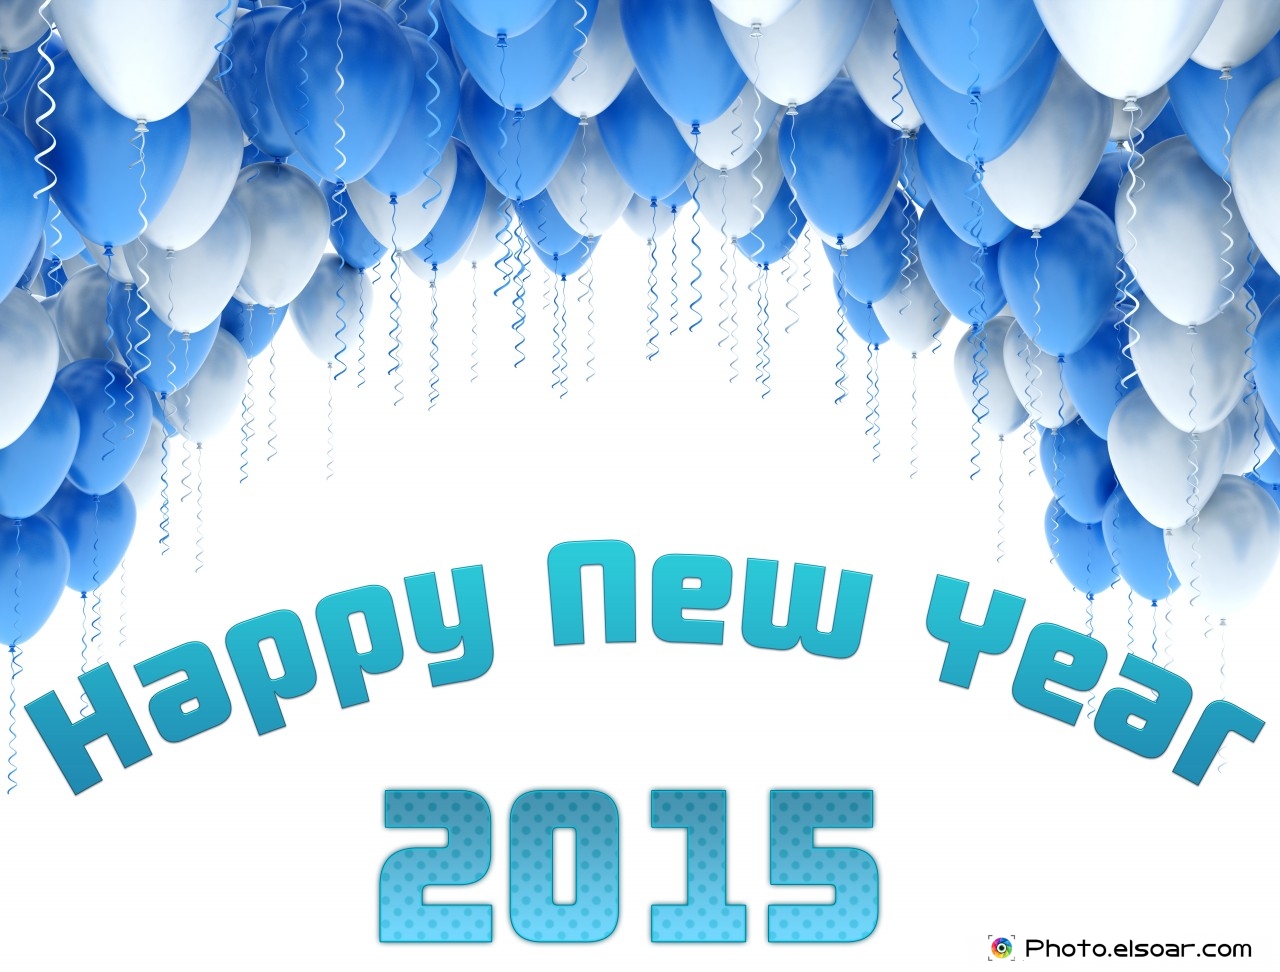 Happy New Year 2015 Messages Blue And White Balloons